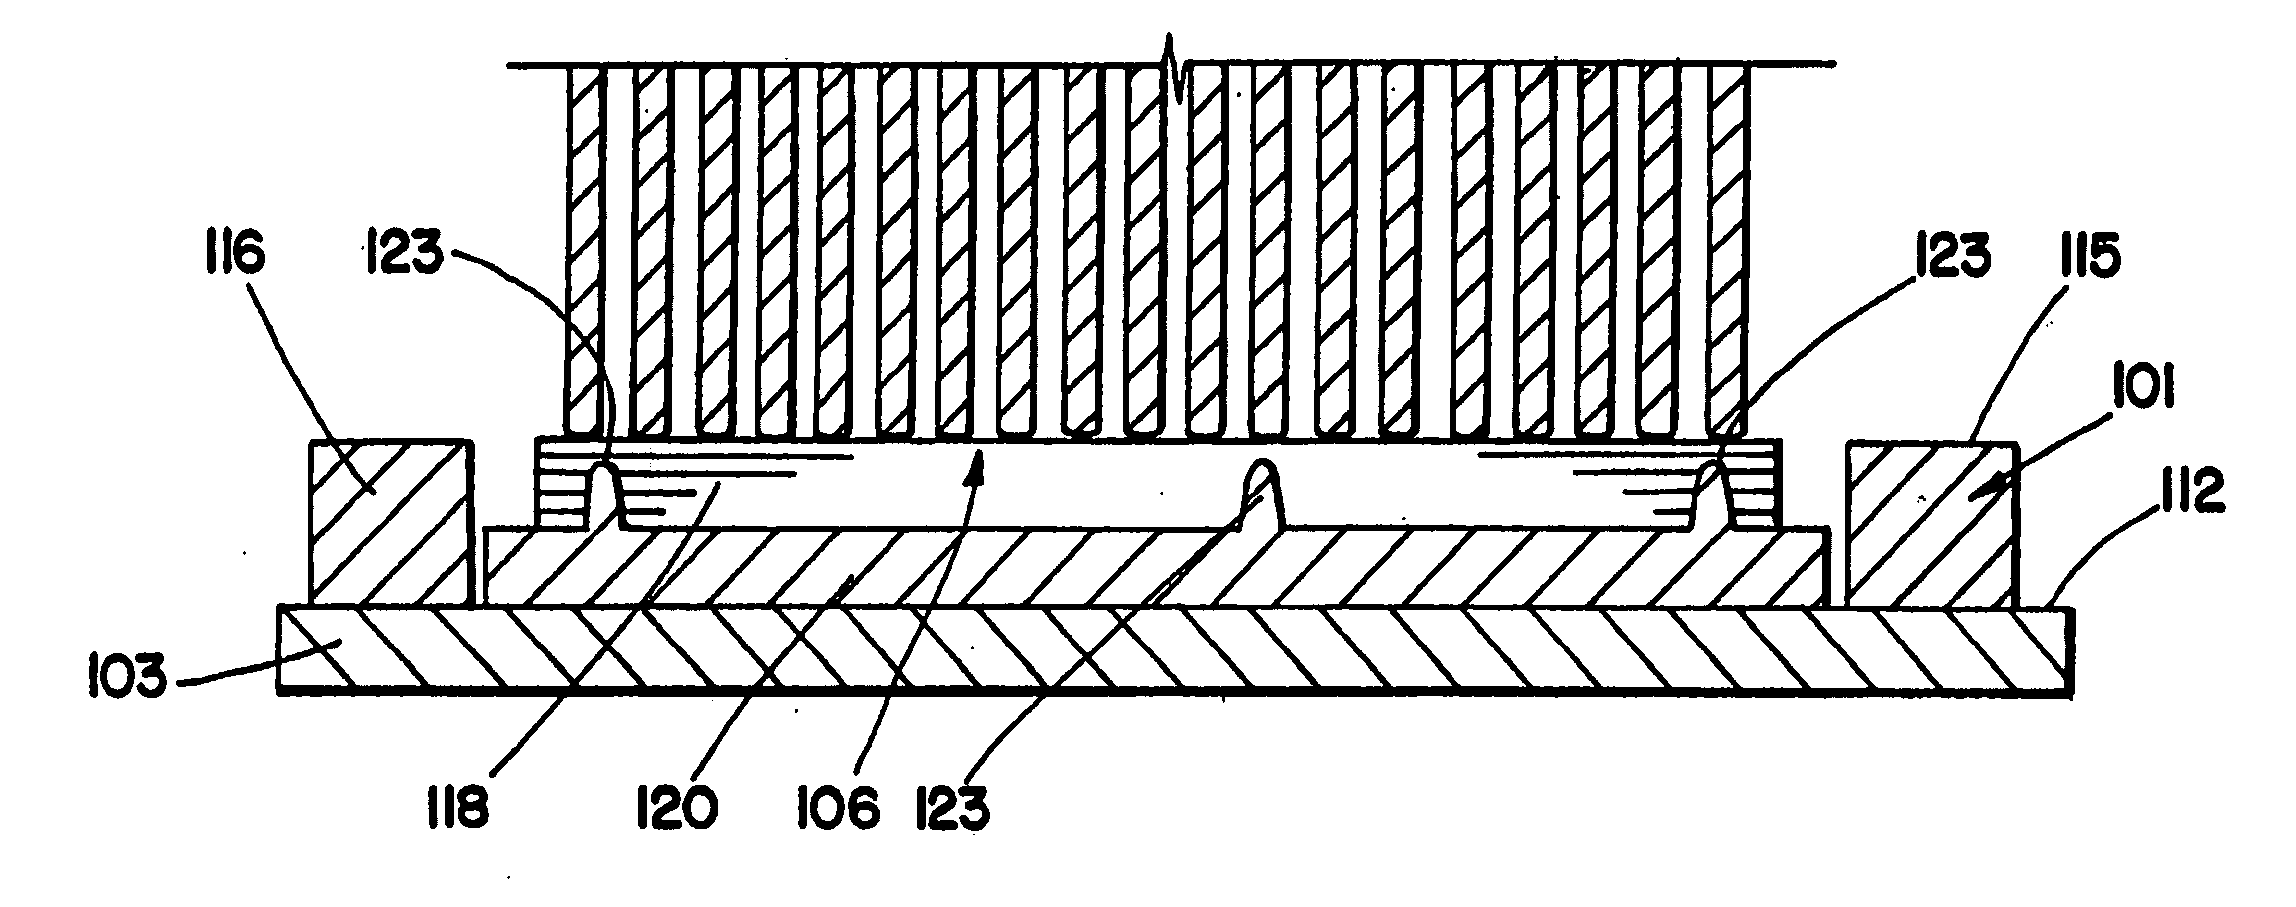 Wafer carrier checker and method of using same